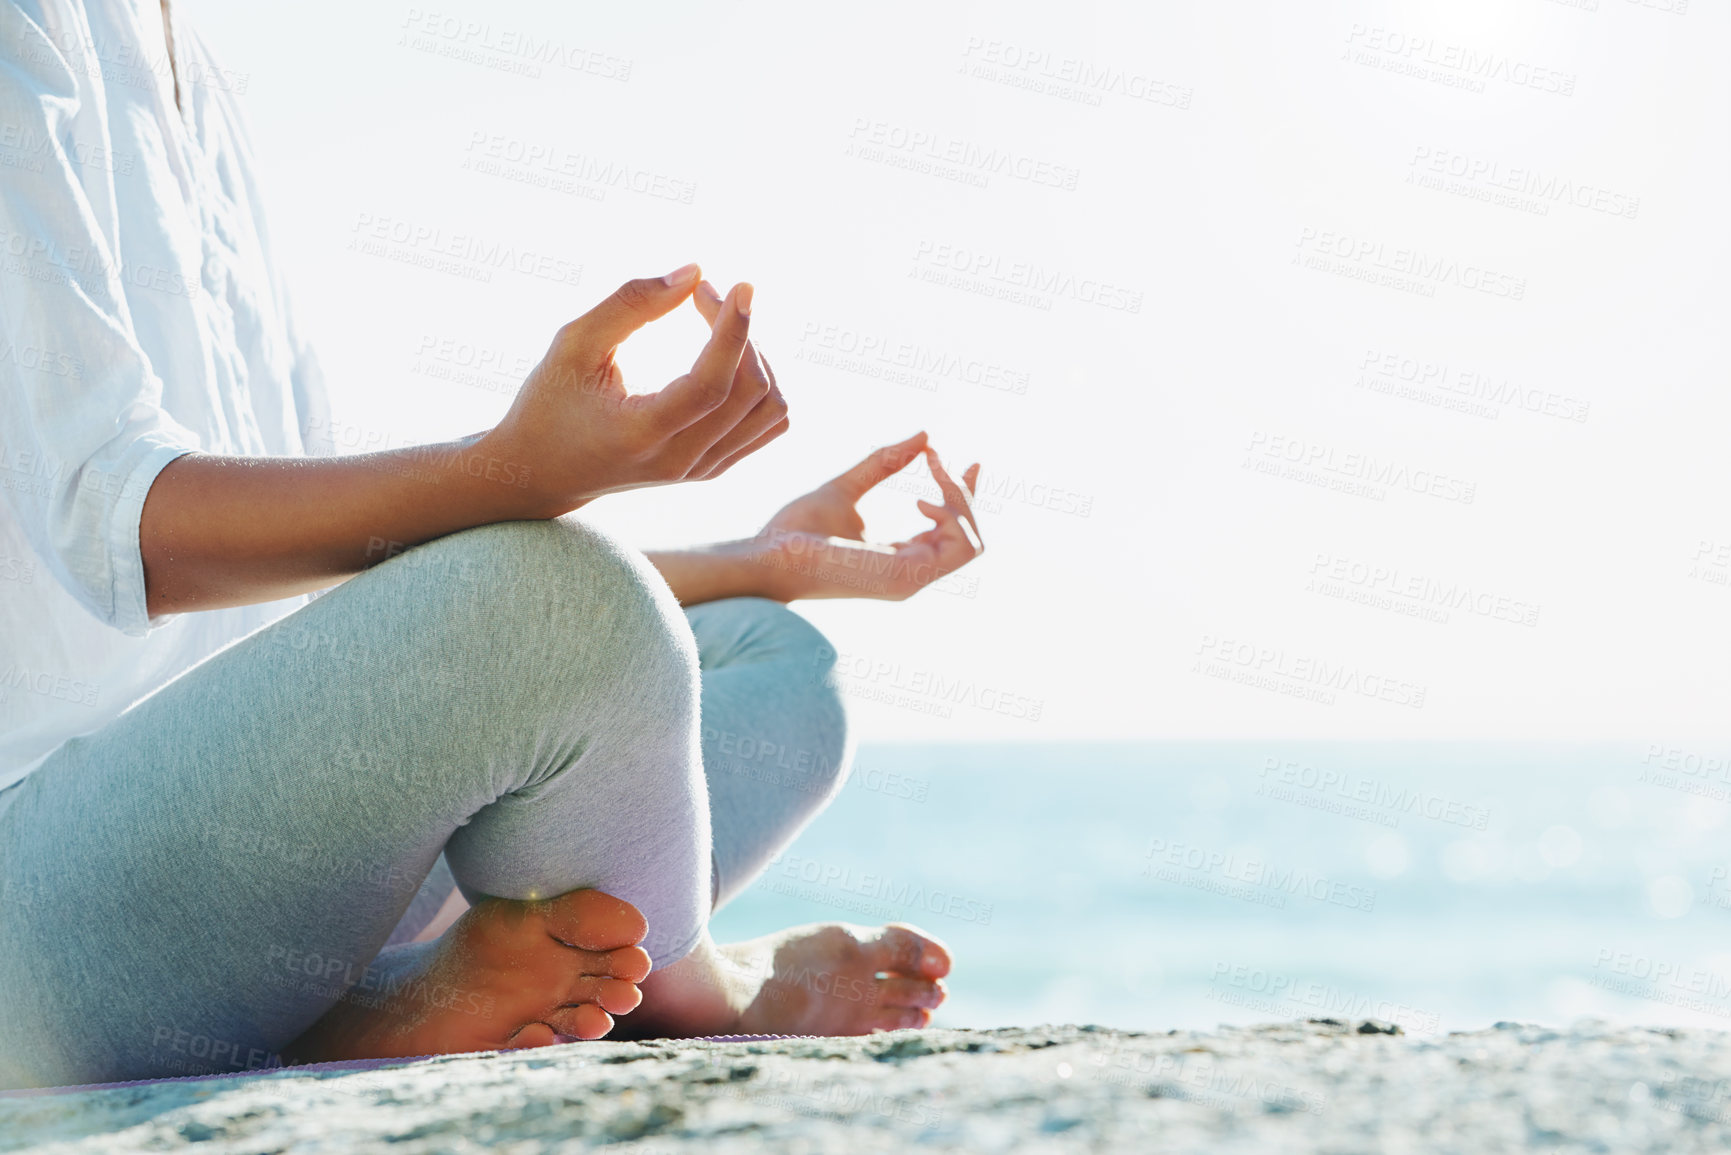 Buy stock photo A young woman performing a yoga routine on the beach in the summer sun